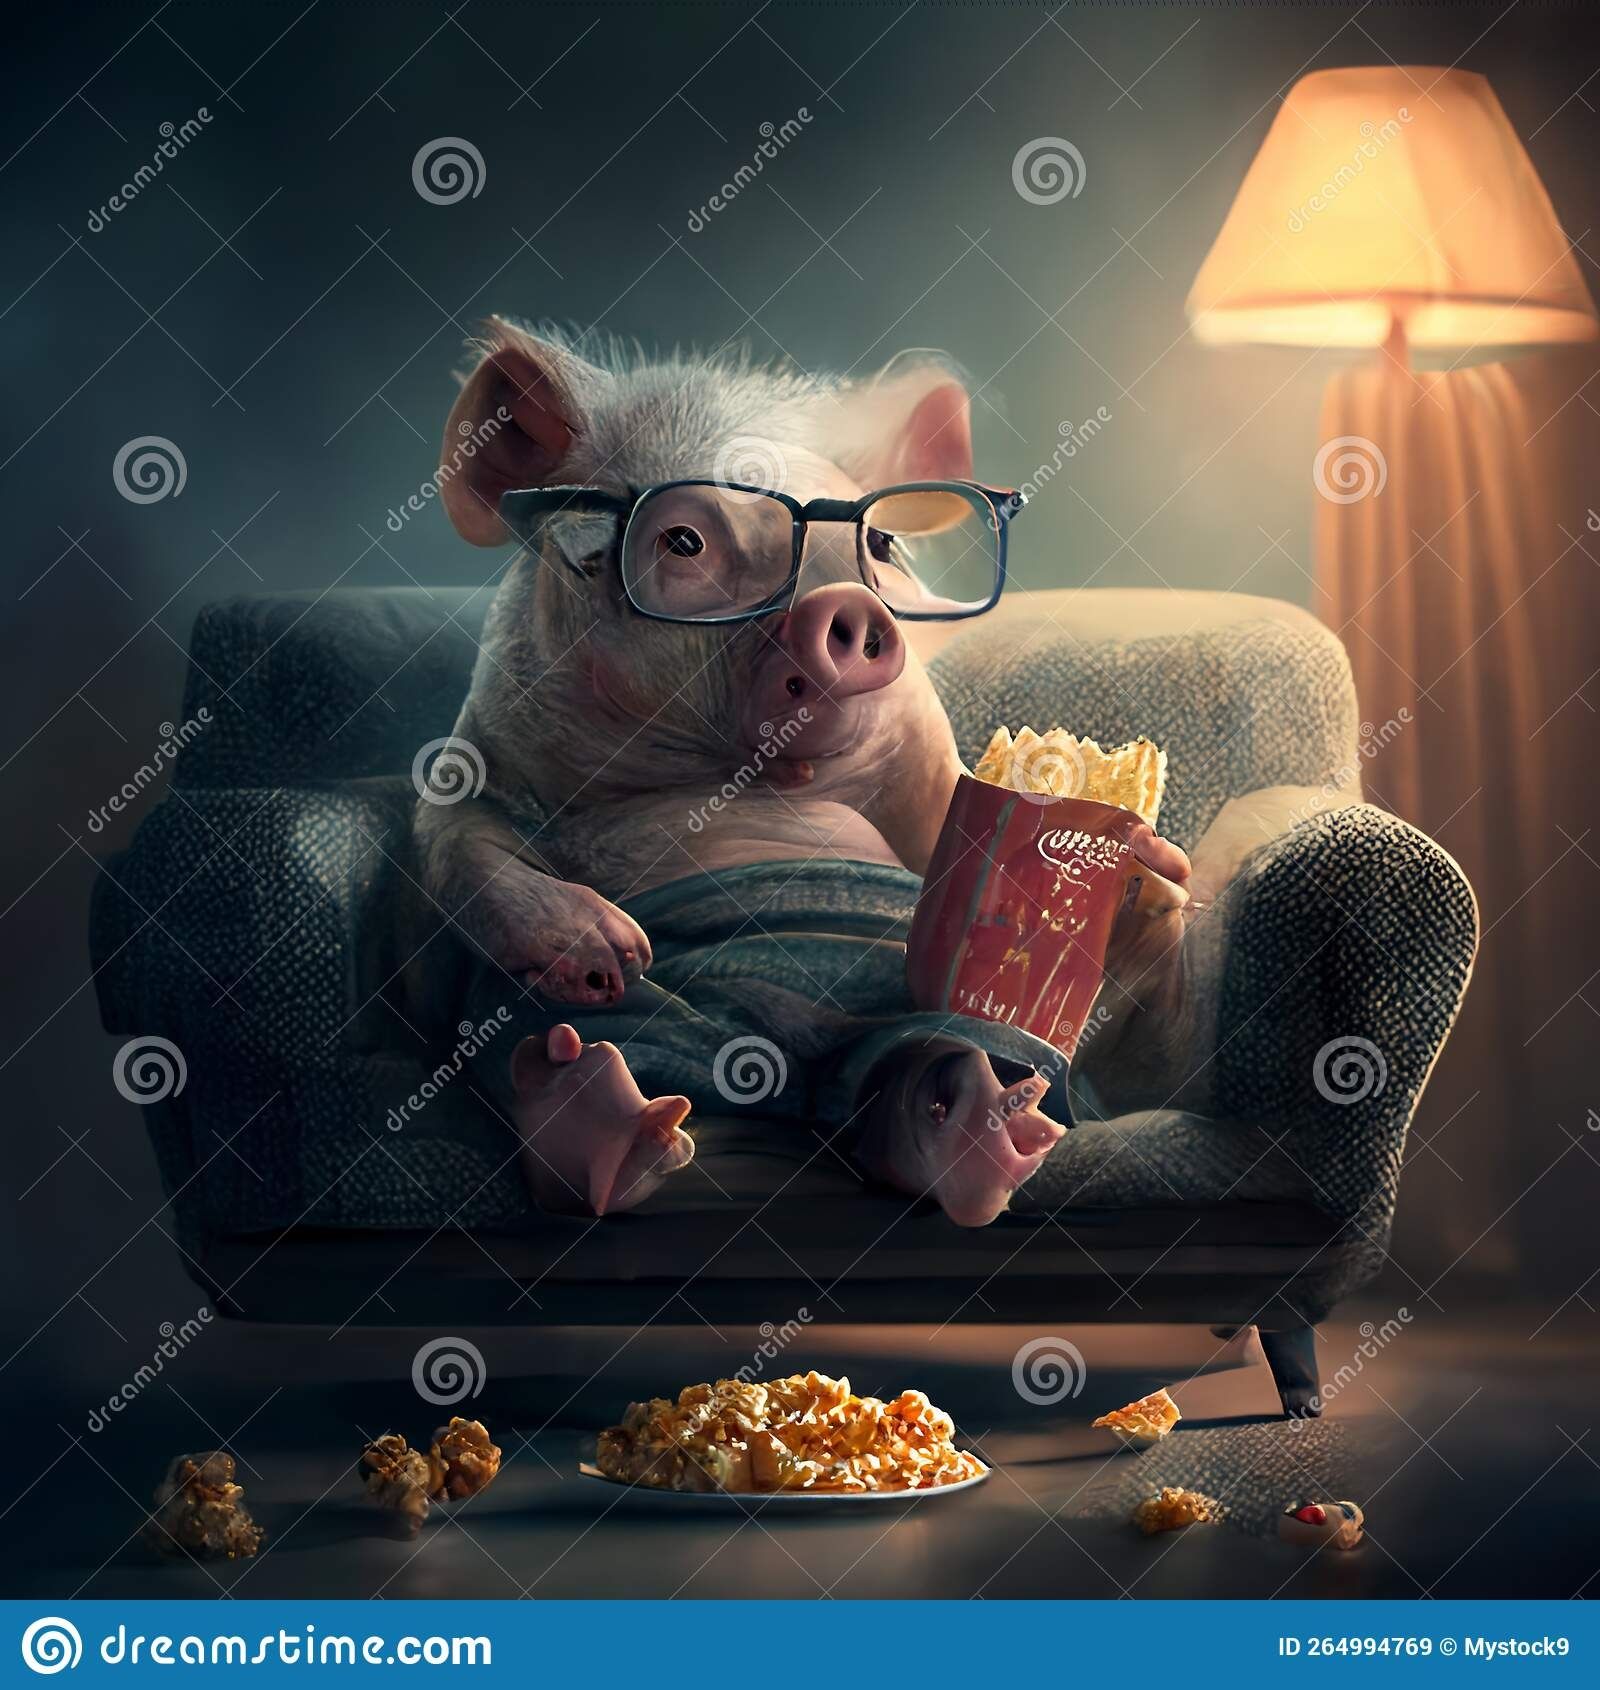 pig-resting-home-watching-tv-ai-generated-piglet-glasses-eats-popcorn-rests-sofa-264994769.jpg